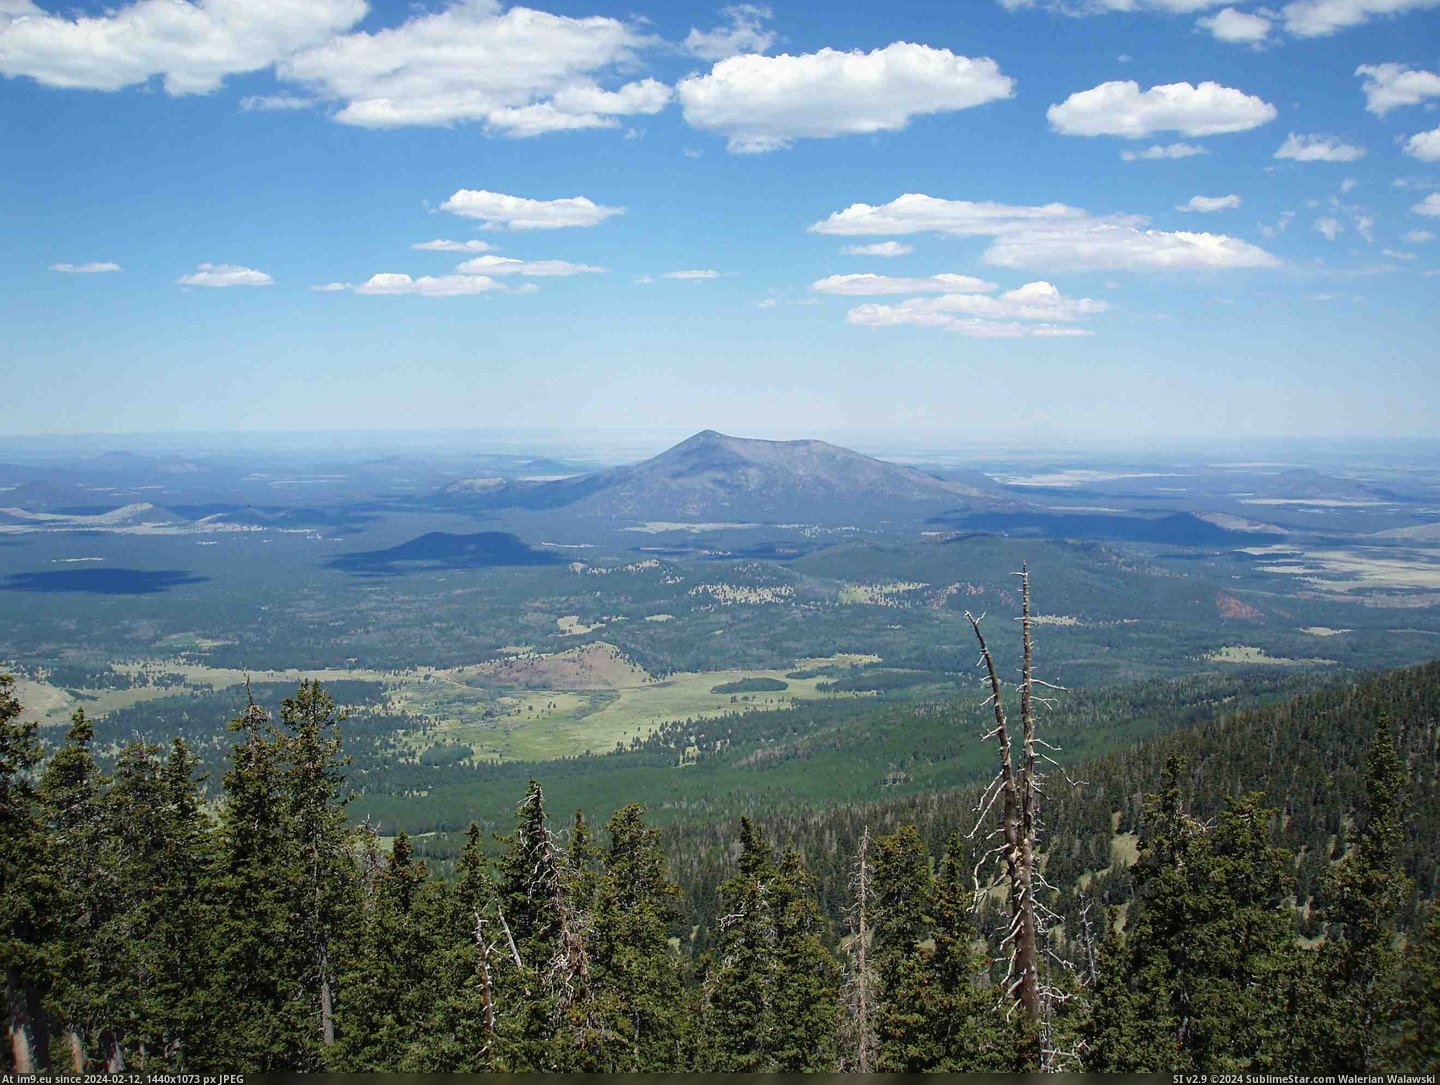 #Off #Couple #Point #Highest #Relaxing #Humphreys #Weeks #Peak #Arizona [Earthporn] A relaxing pic I took a couple weeks back while looking down off the highest point in Arizona - Humphreys Peak [2460 Pic. (Bild von album My r/EARTHPORN favs))